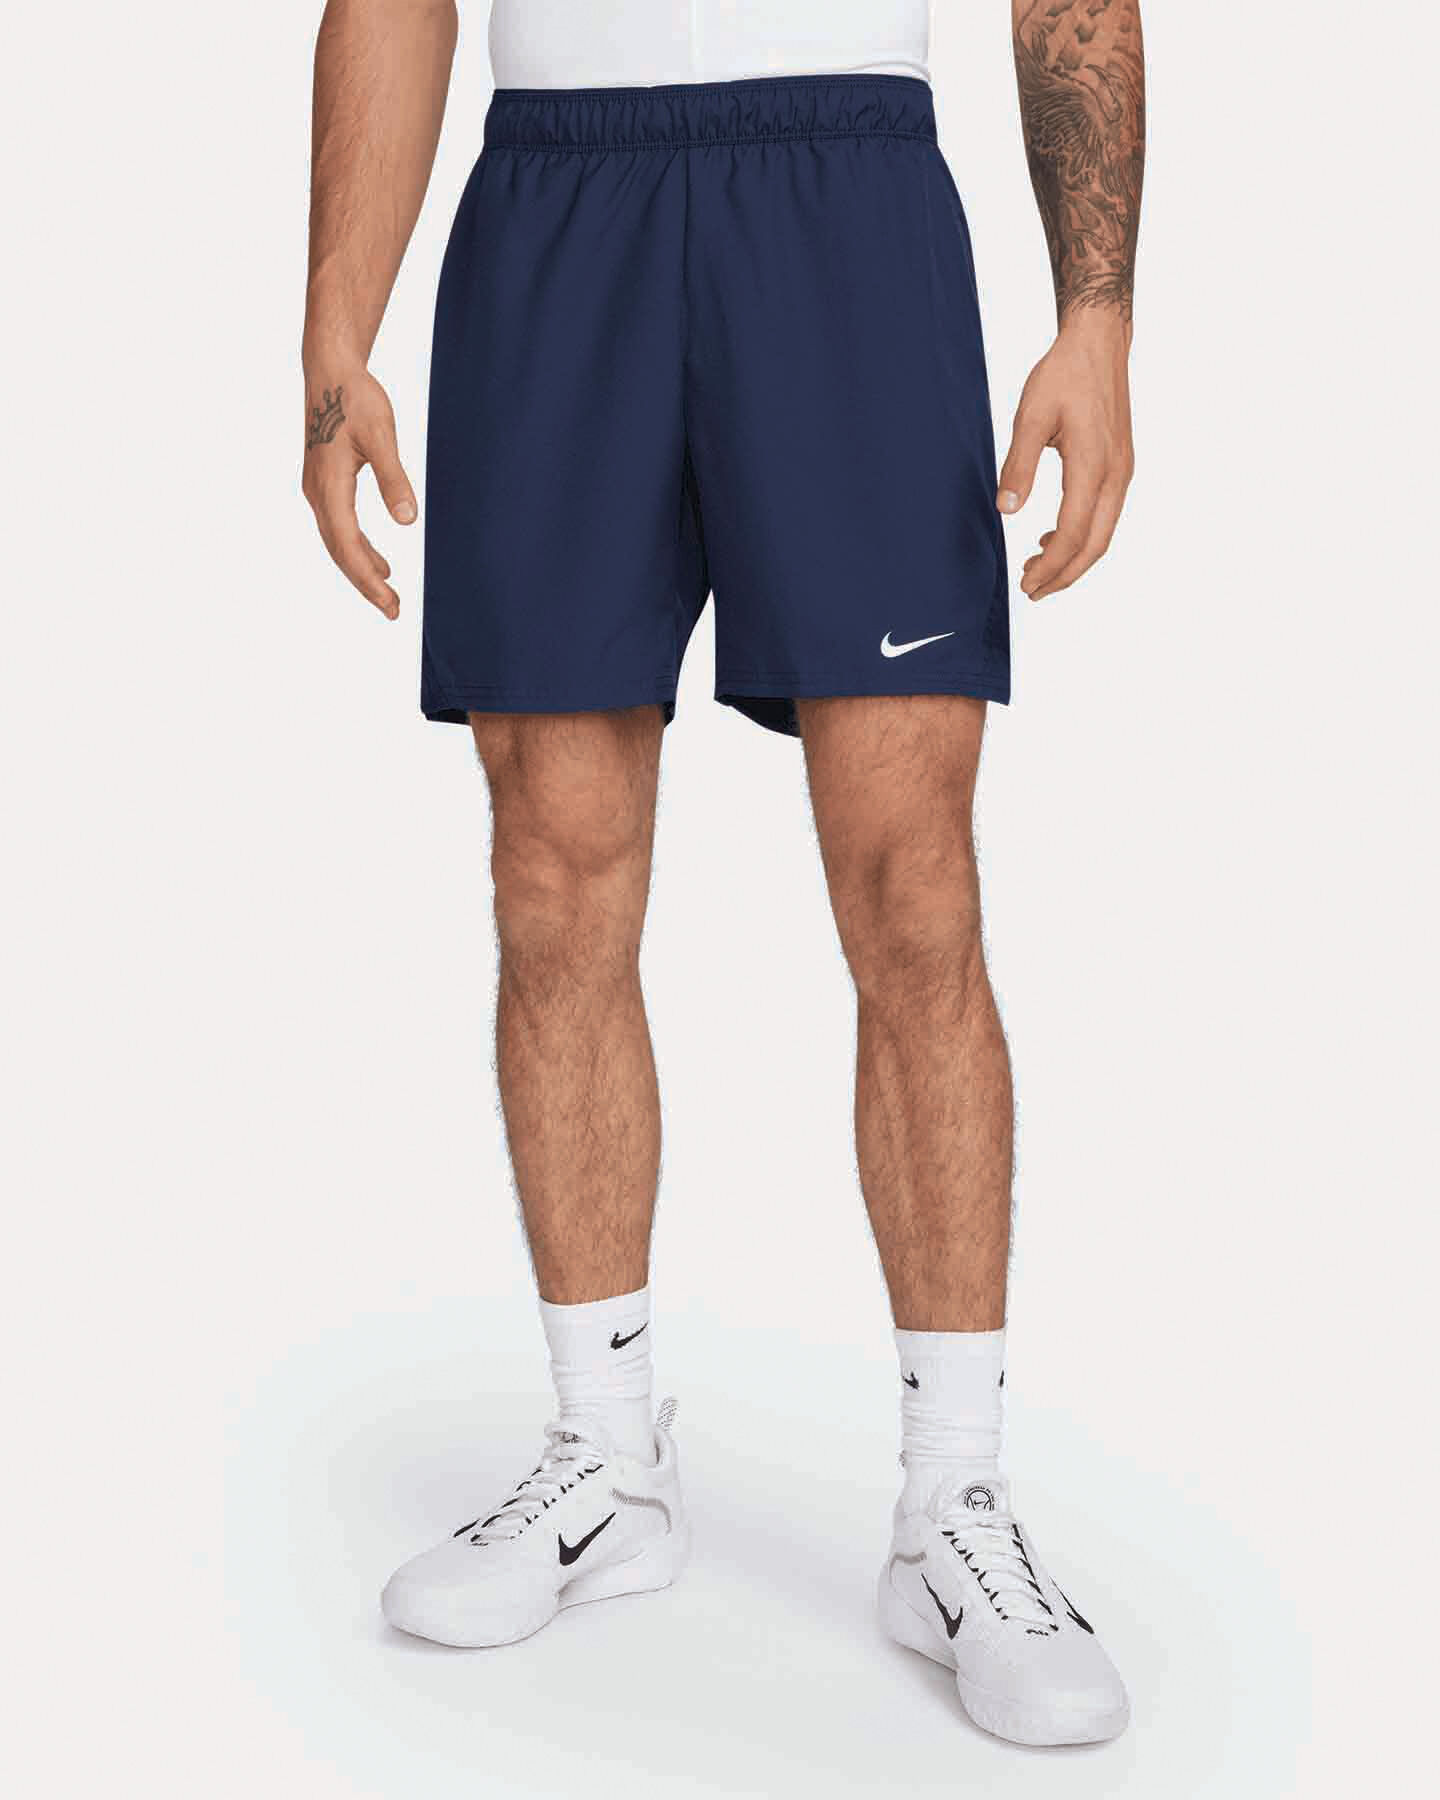  Pantaloncini tennis NIKE COURT DRI FIT VICTORY 7IN TENNIS M S5644138|451|S scatto 0